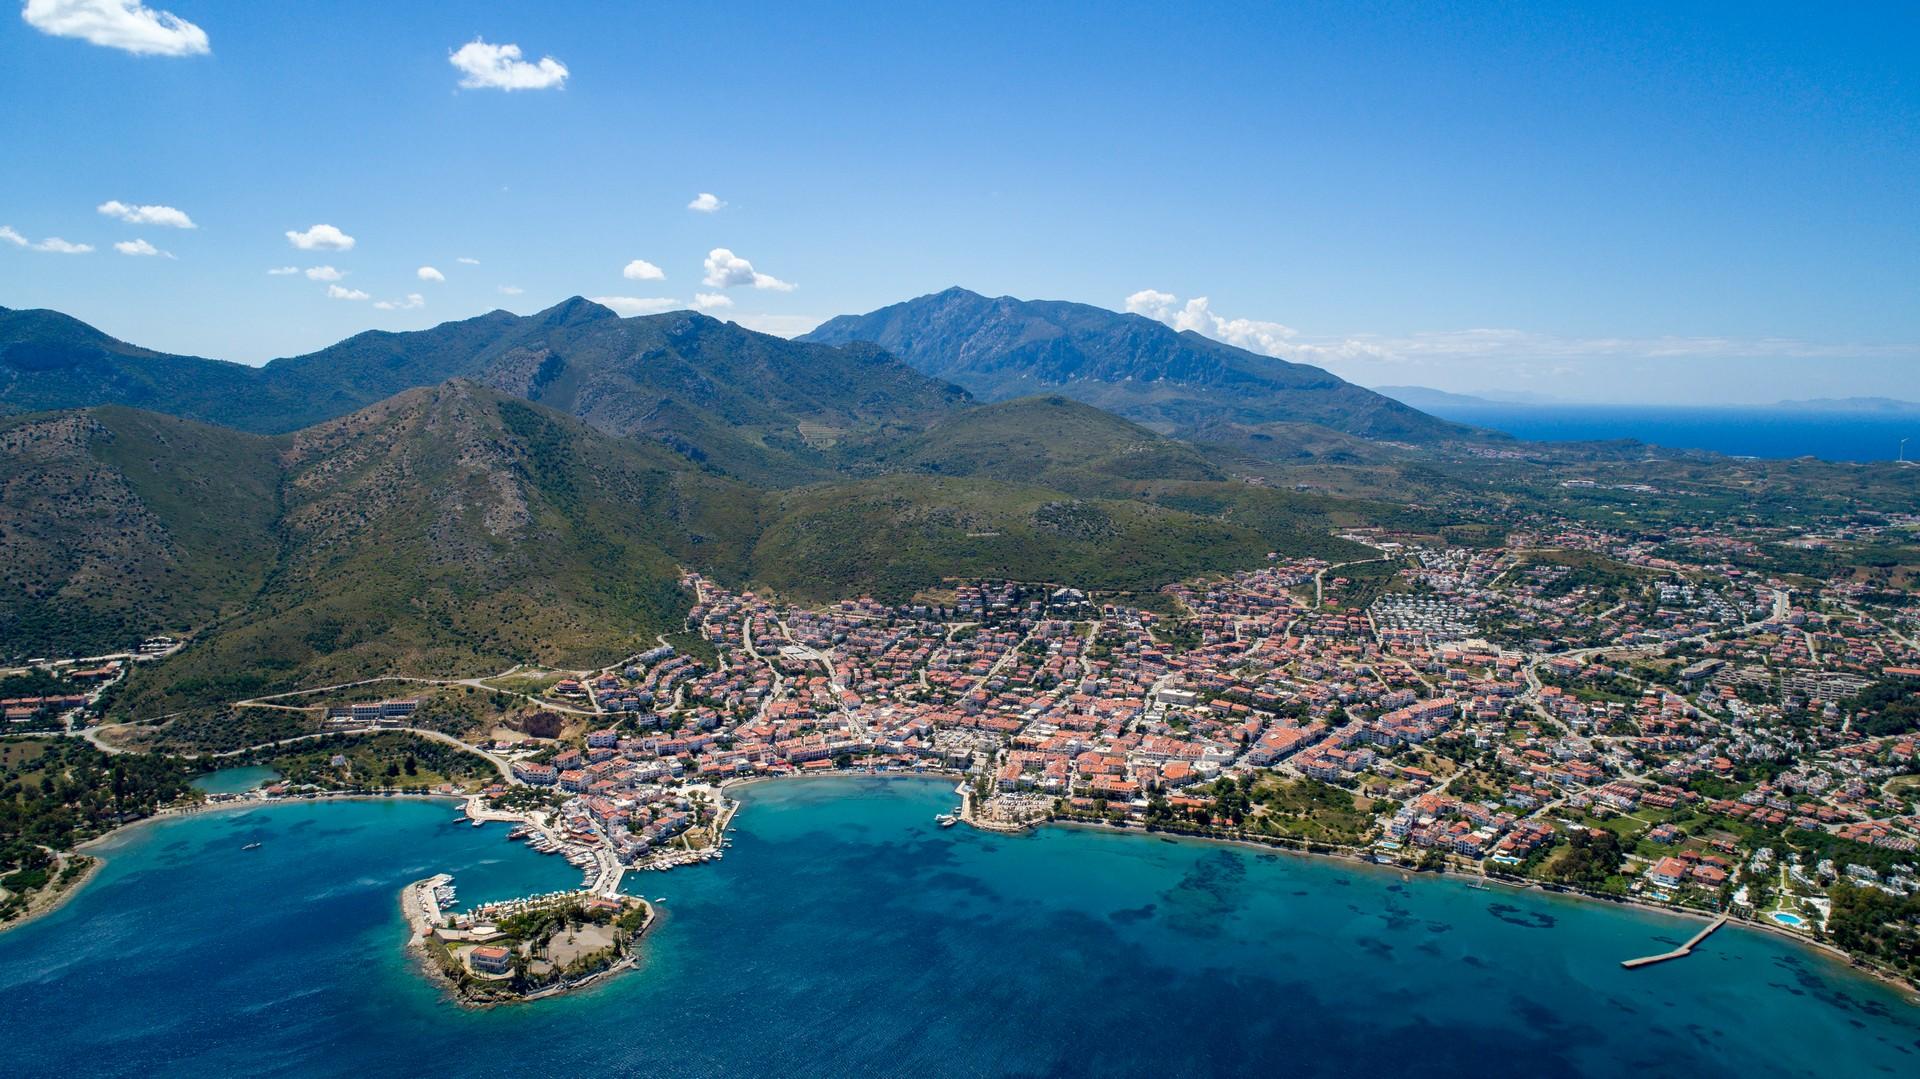 Aerial view of mountain range in Datça on a sunny day with some clouds